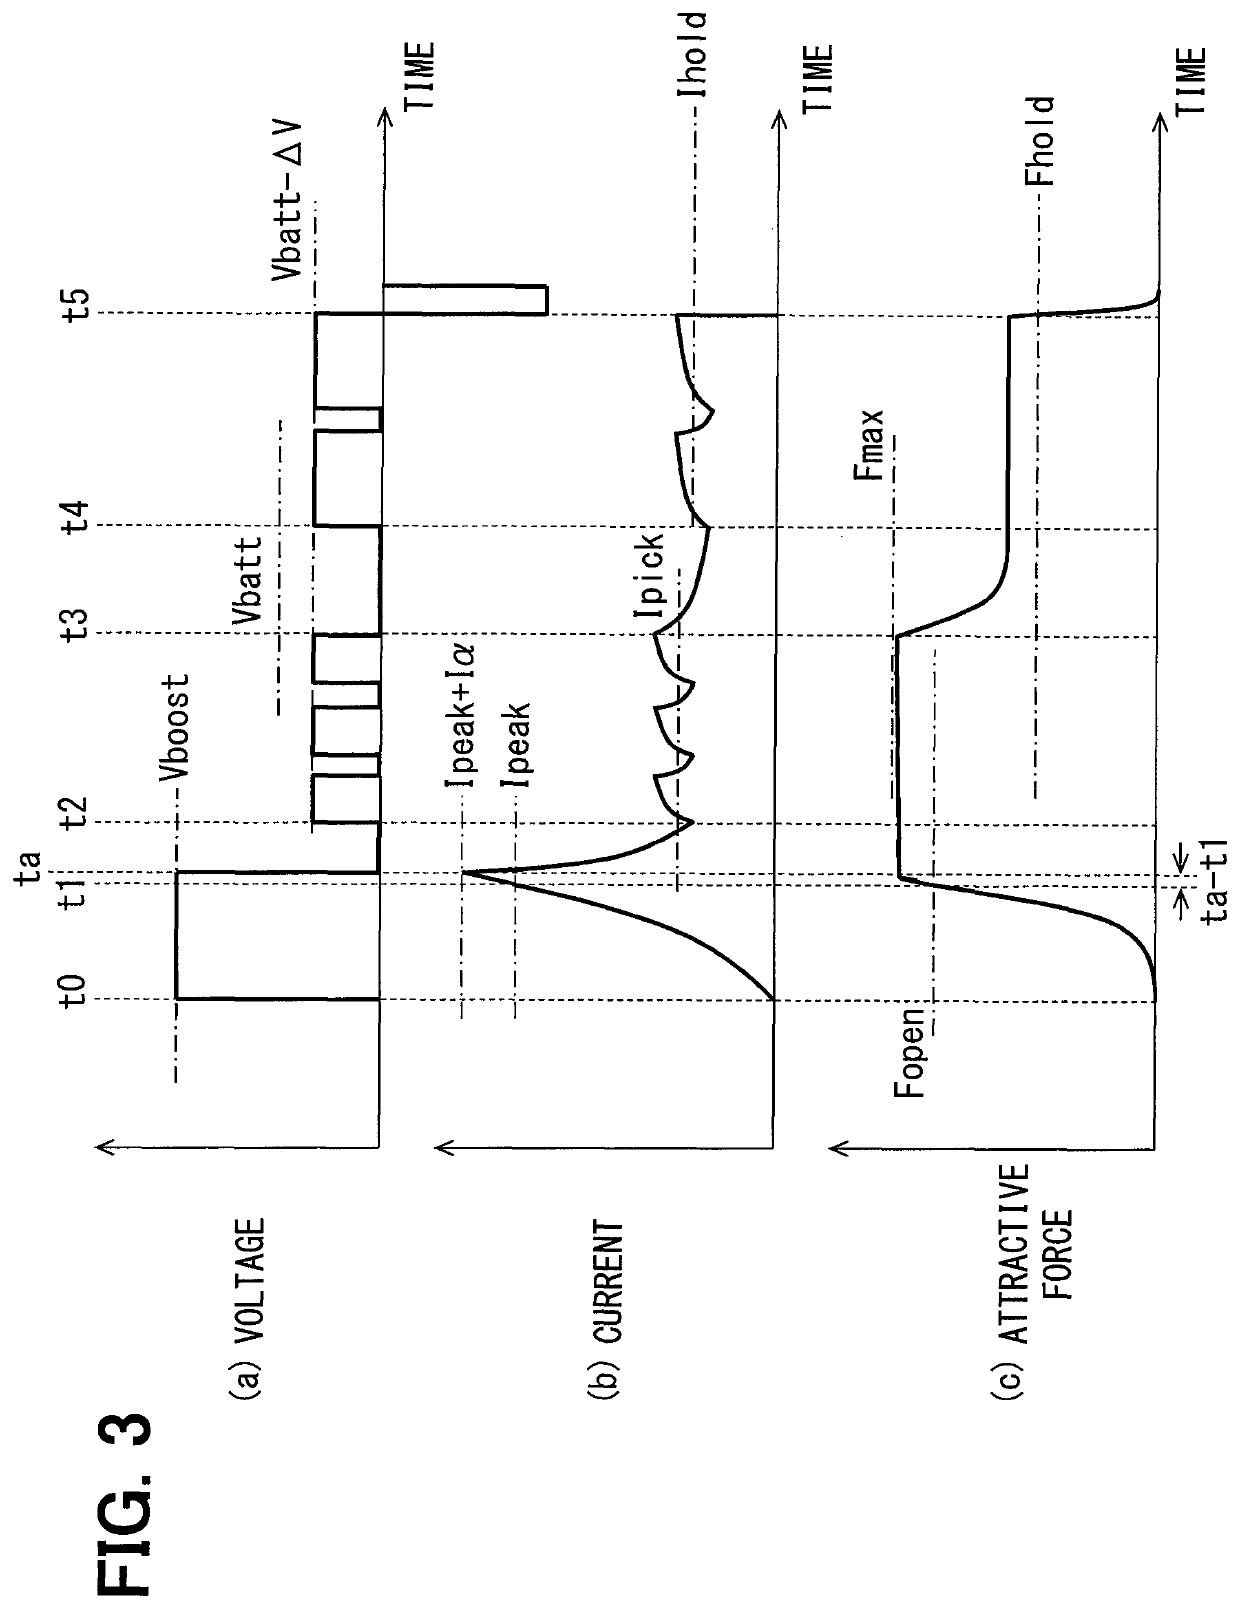 Fuel injection control device and fuel injection system